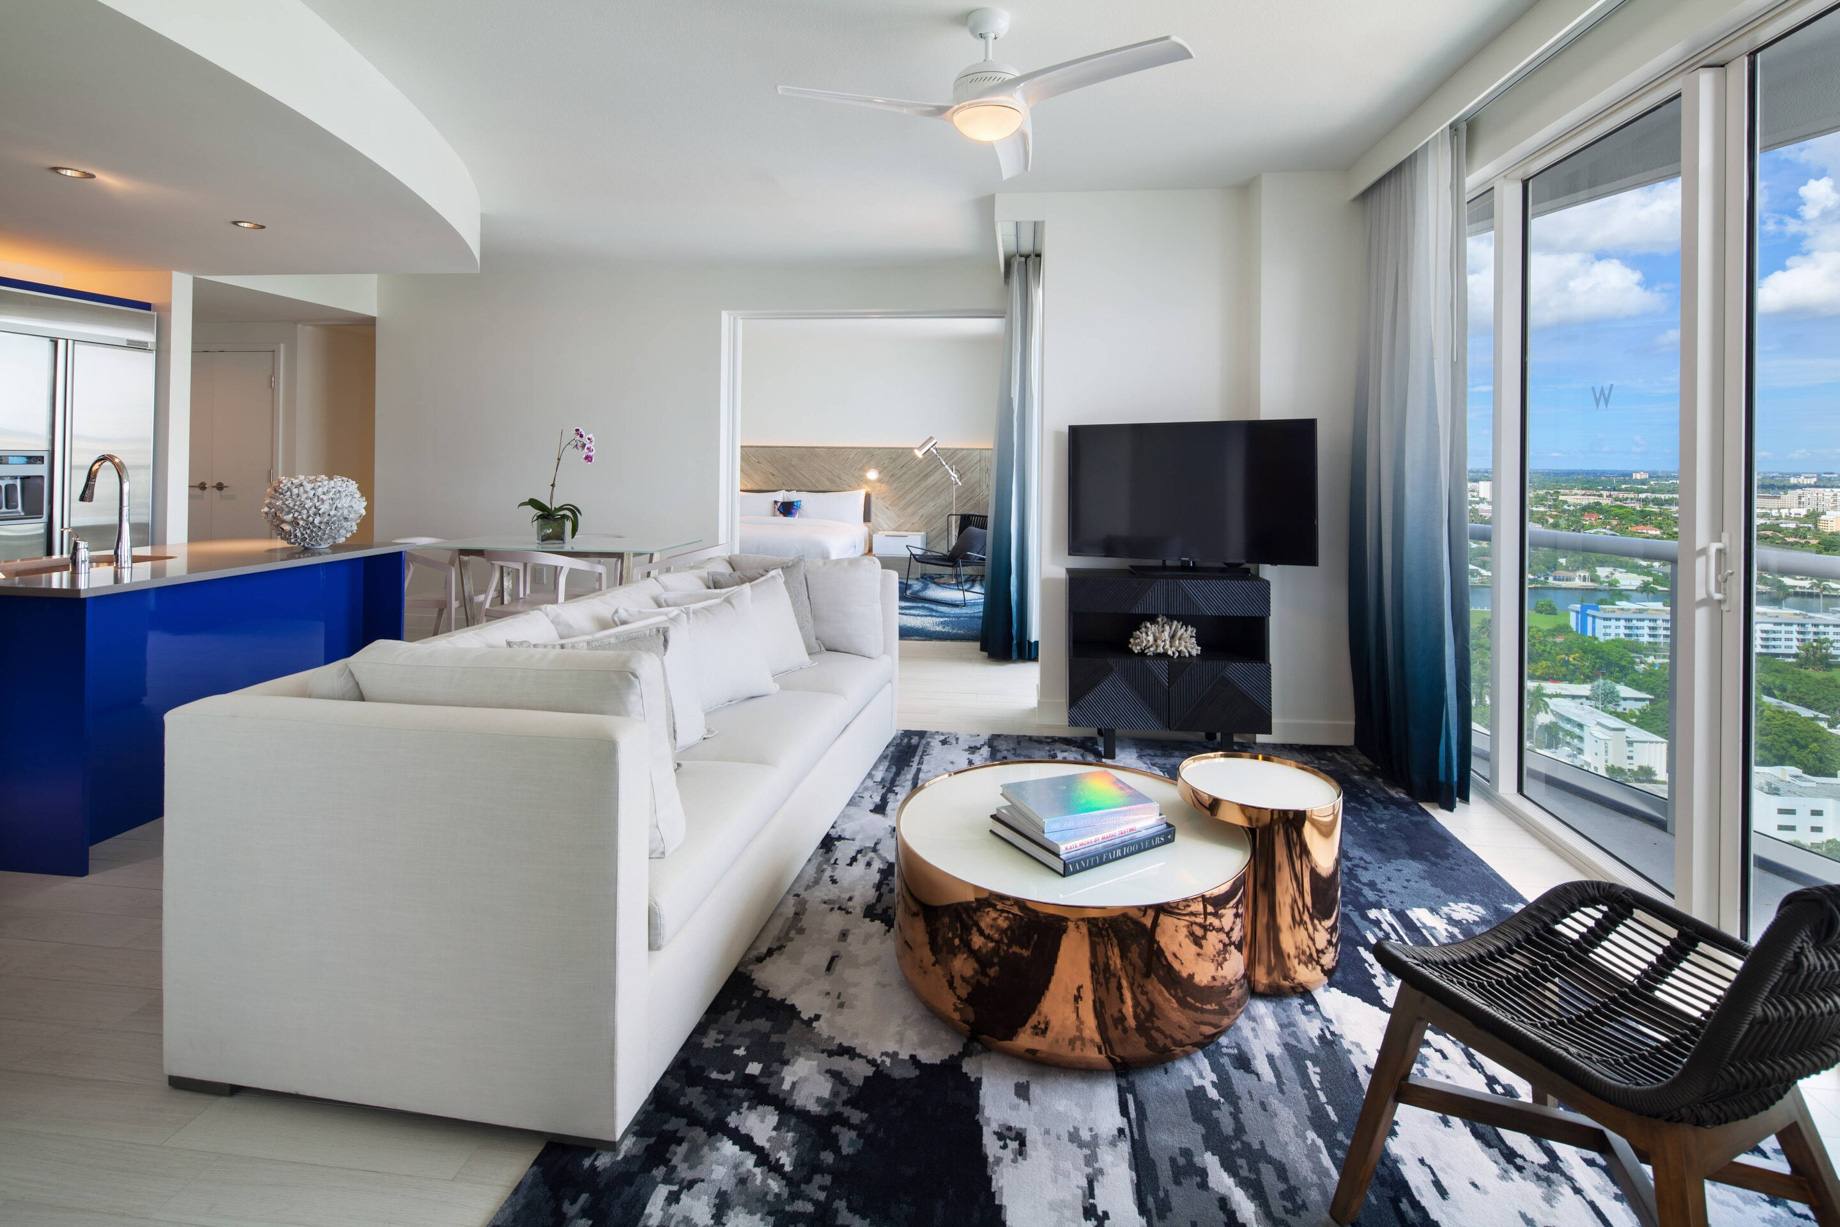 W Fort Lauderdale Hotel – Fort Lauderdale, FL, USA – Cool Ocean View Residential Suite Living Area